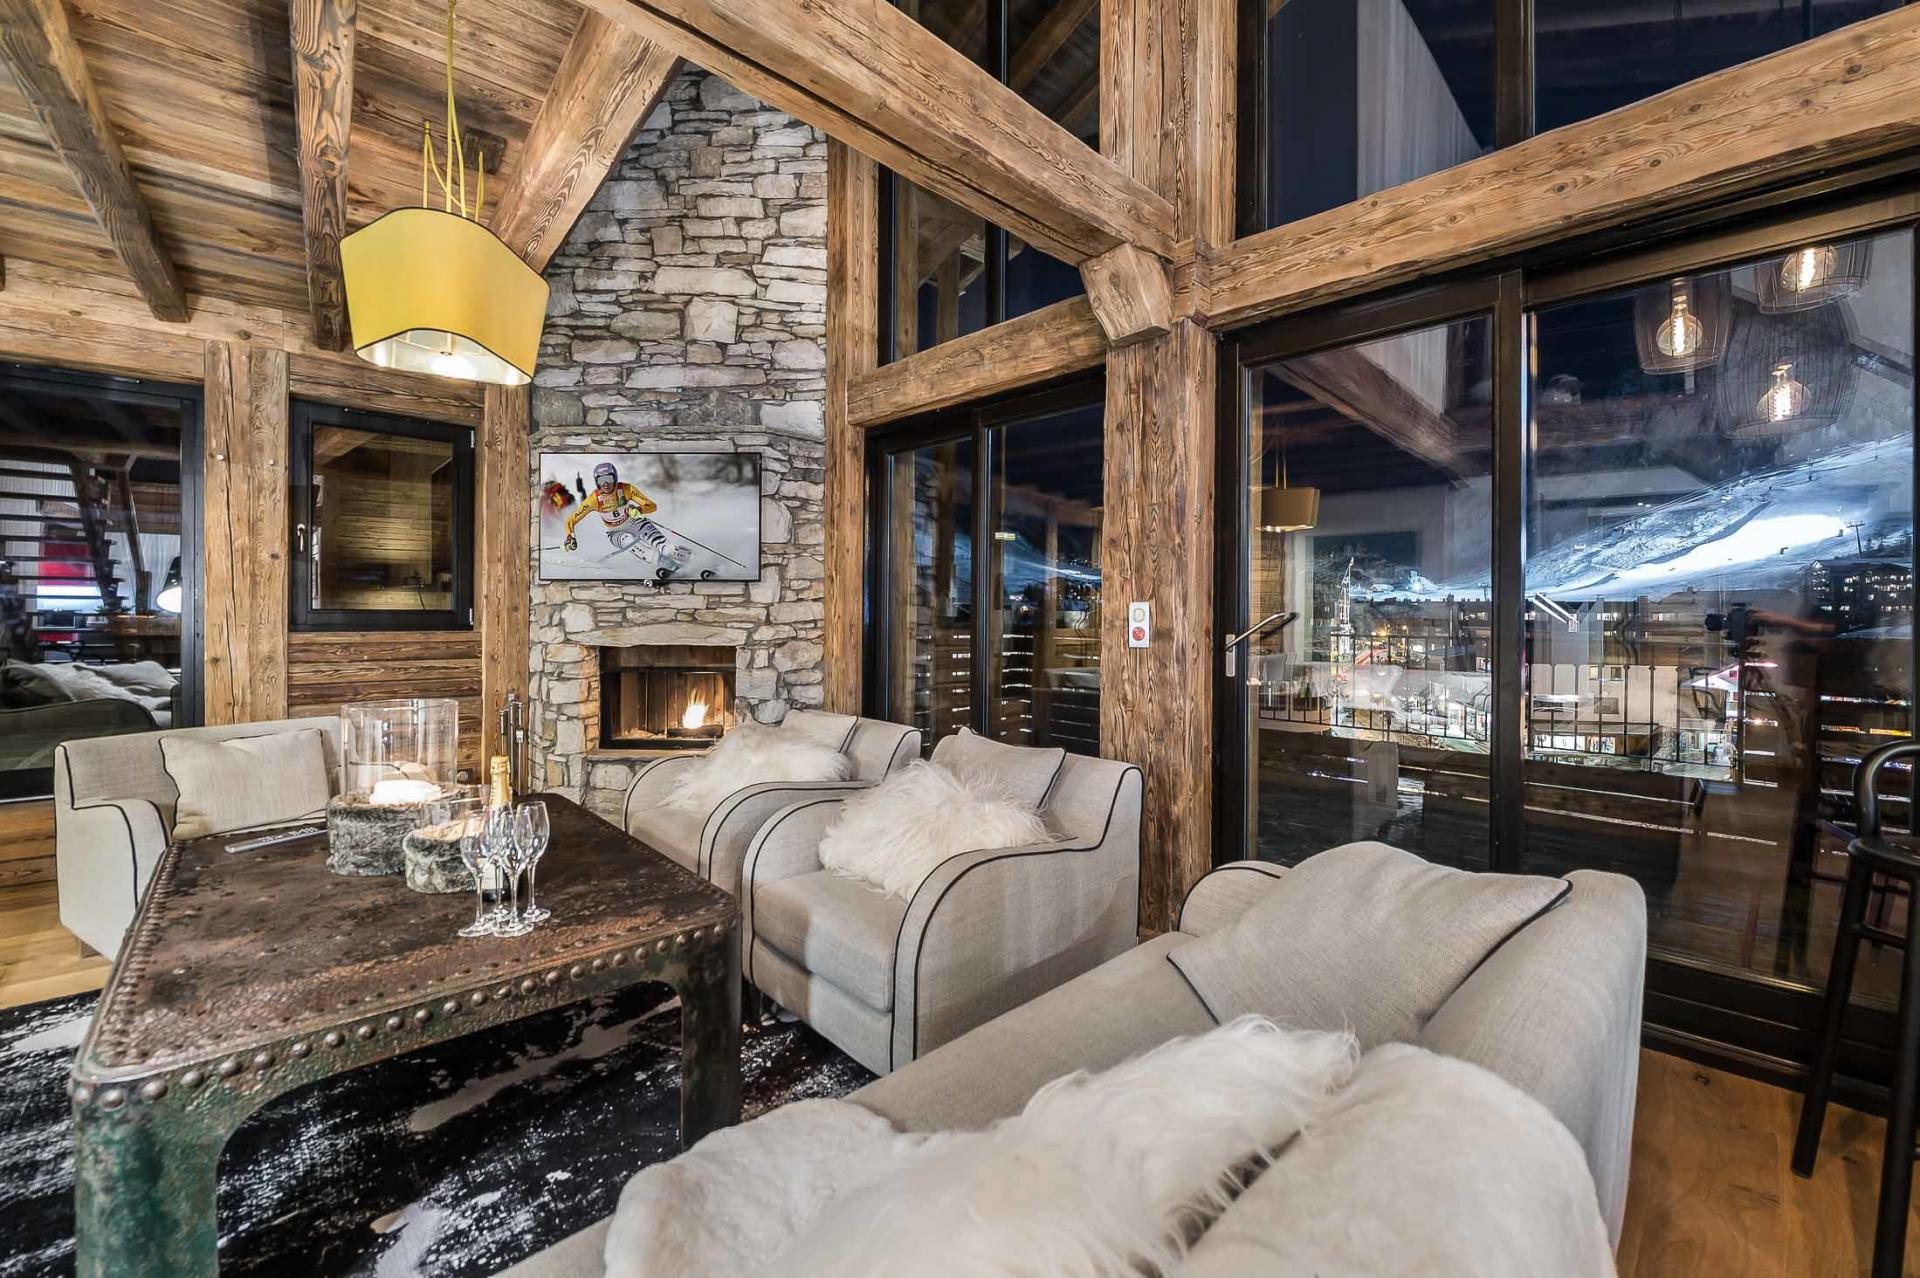 VIEWS ON THE MOUNTAINS BY NIGHT IN A BEAUTFIFUL APARTMENT IN THE ALPS